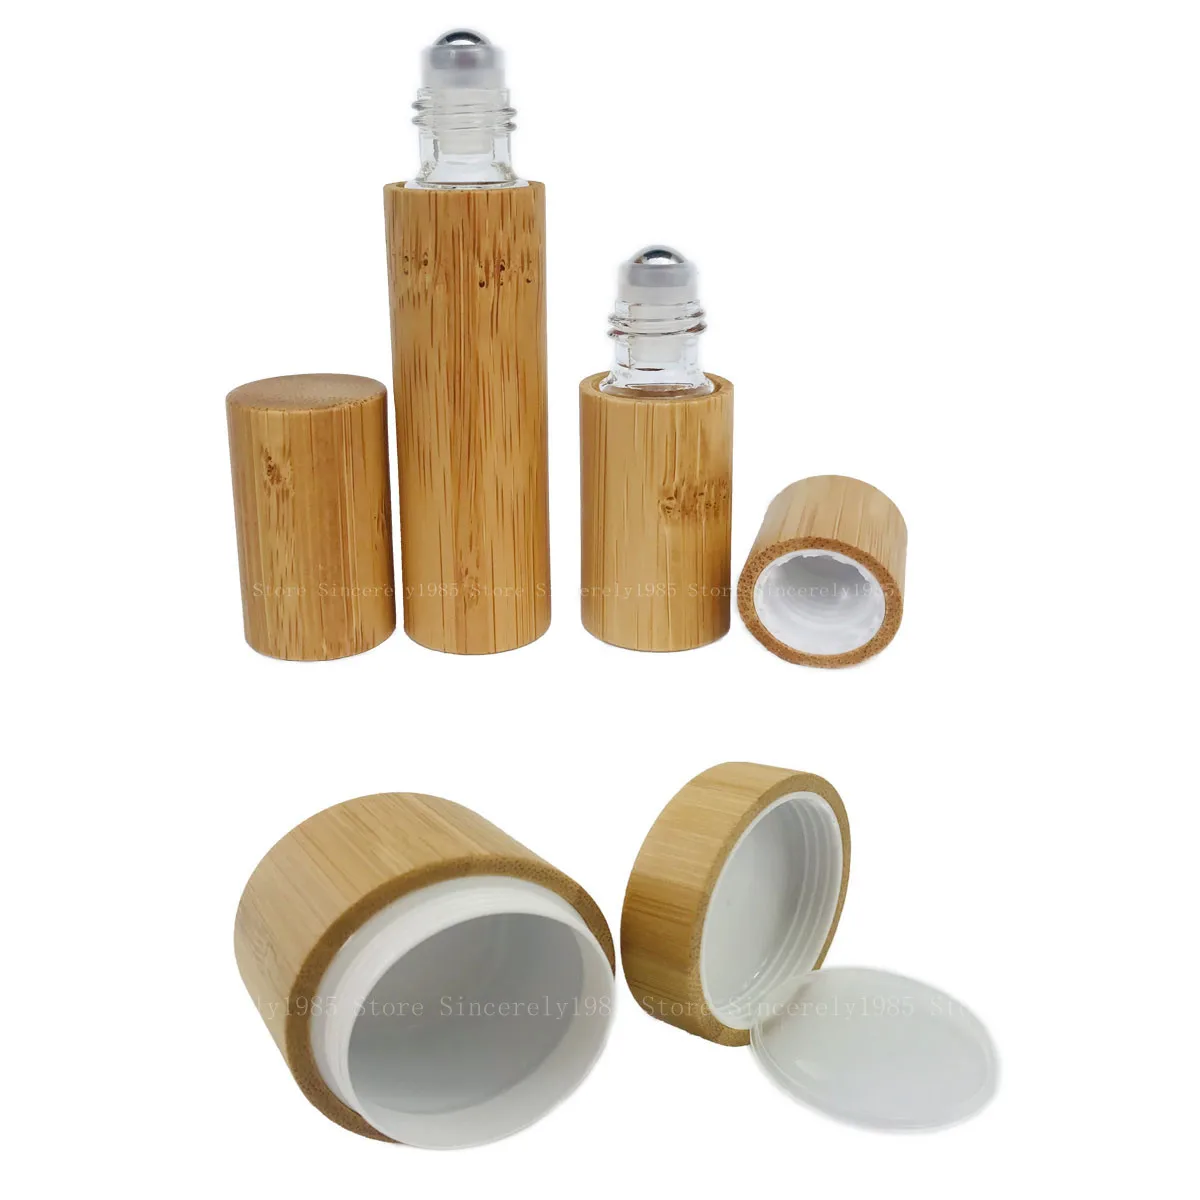 5ML 10ML Bamboo Wood Bottle Perfume Stainless Steel Roller Ball Aroma Diffuser Bottle, 30ml Face Cream Cosmetic Container Bottle bamboo and wood finishing box decor pencil holder storage bucket desktop stationery container case decorative basket